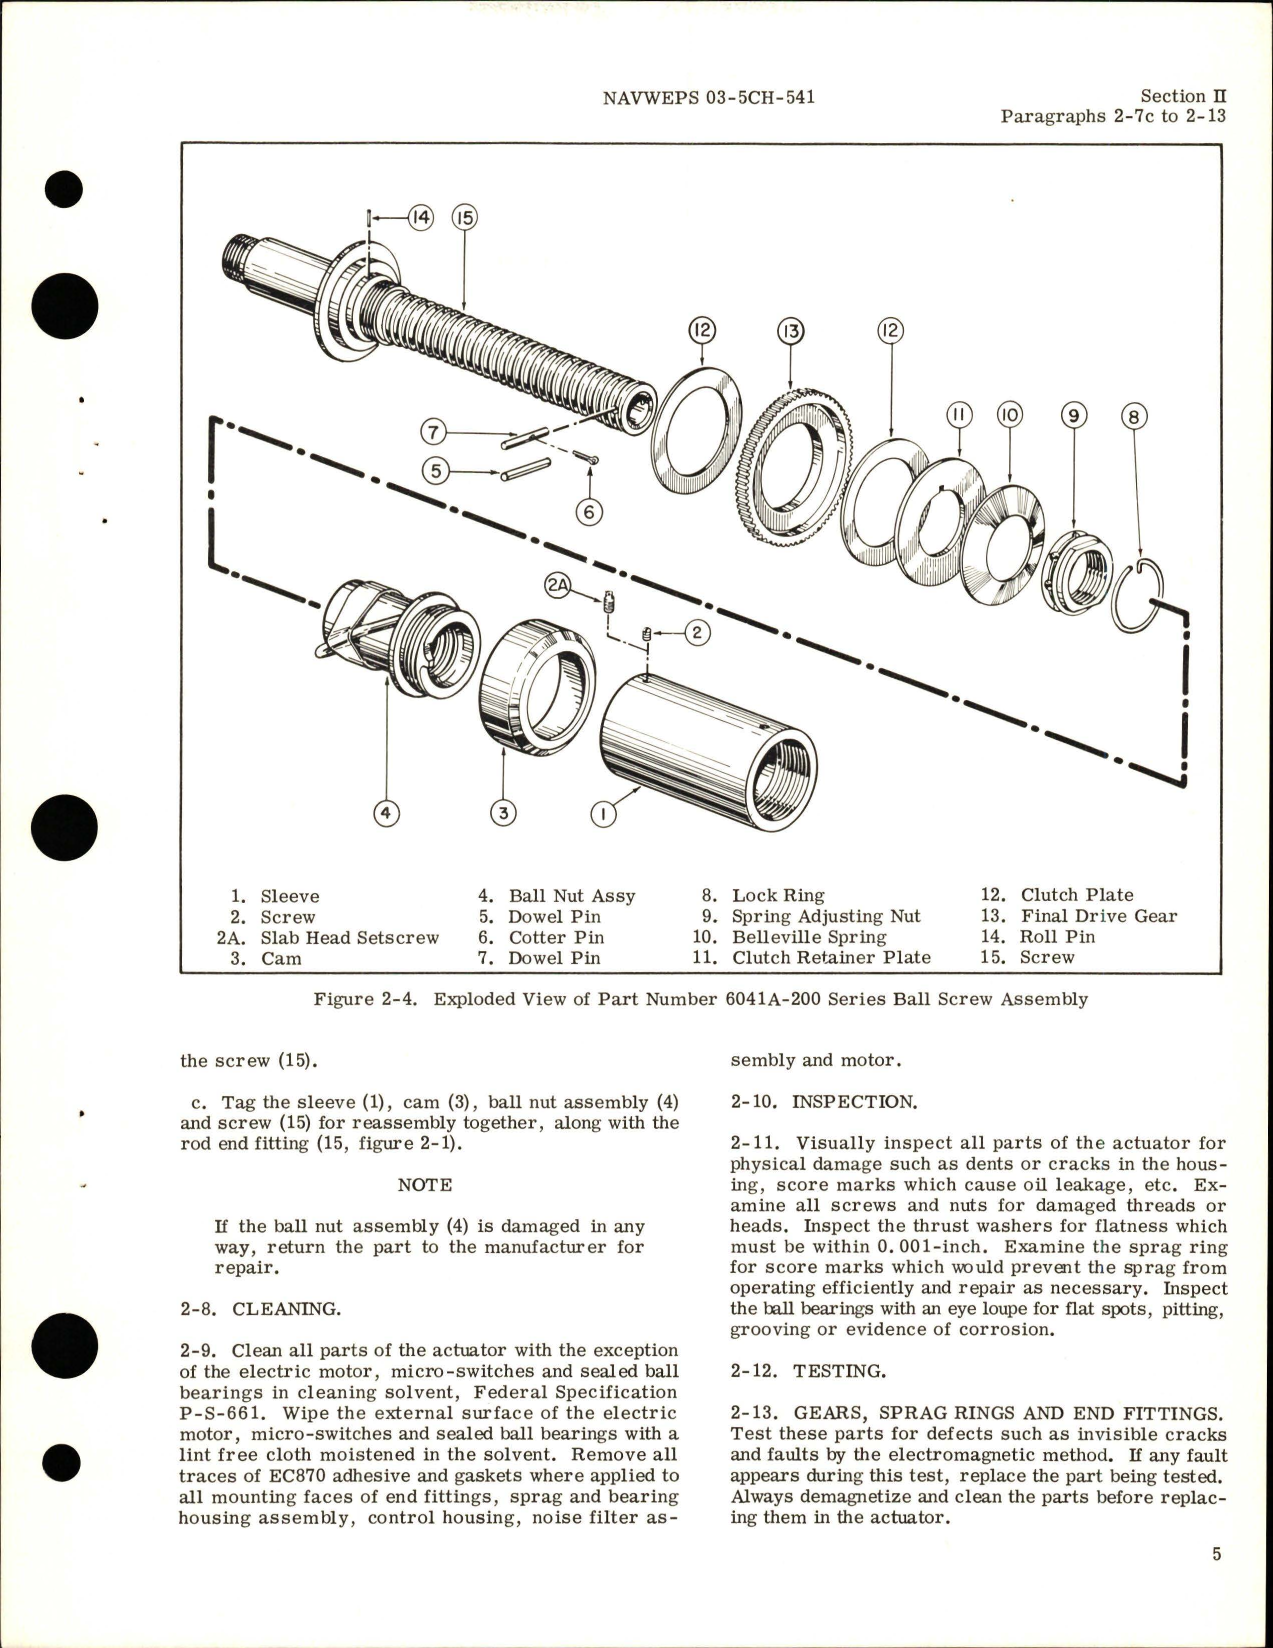 Sample page 9 from AirCorps Library document: Overhaul Instructions for Rudder Trim Actuator - Models 16041A, 16041B, and 16041C 